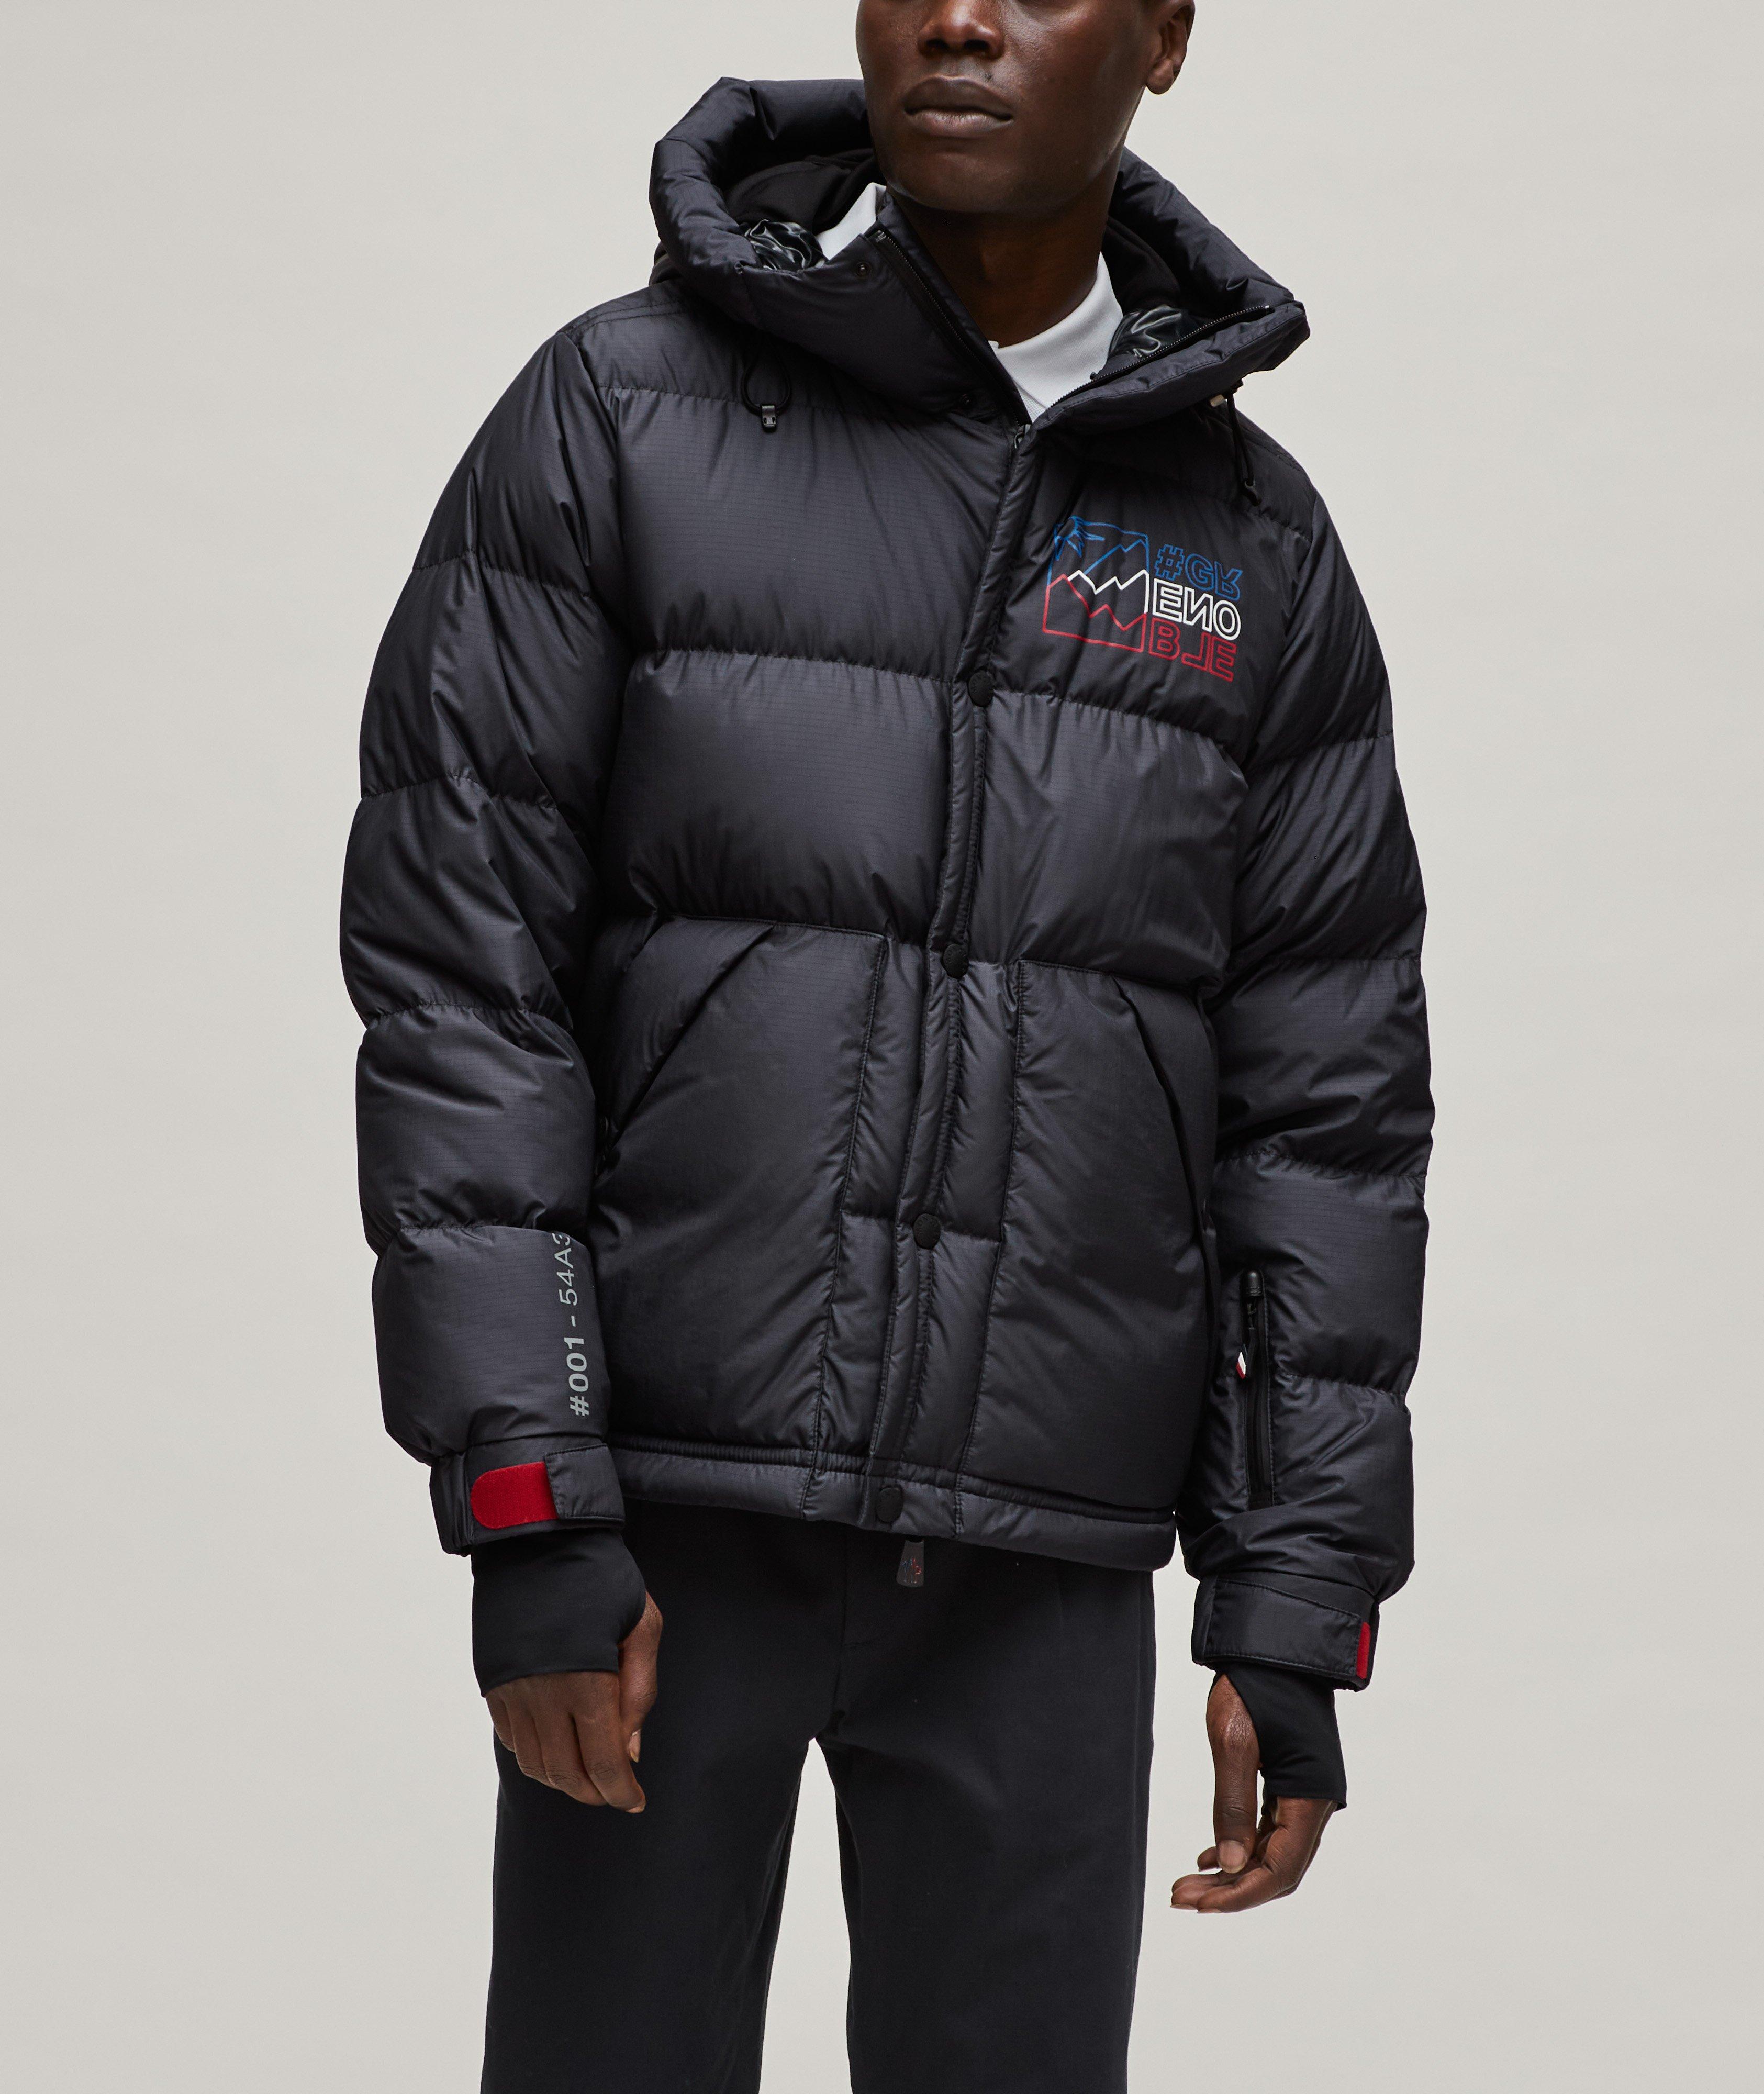 Moncler Grenoble Cristaux Lightly Padded Down Jacket, Coats